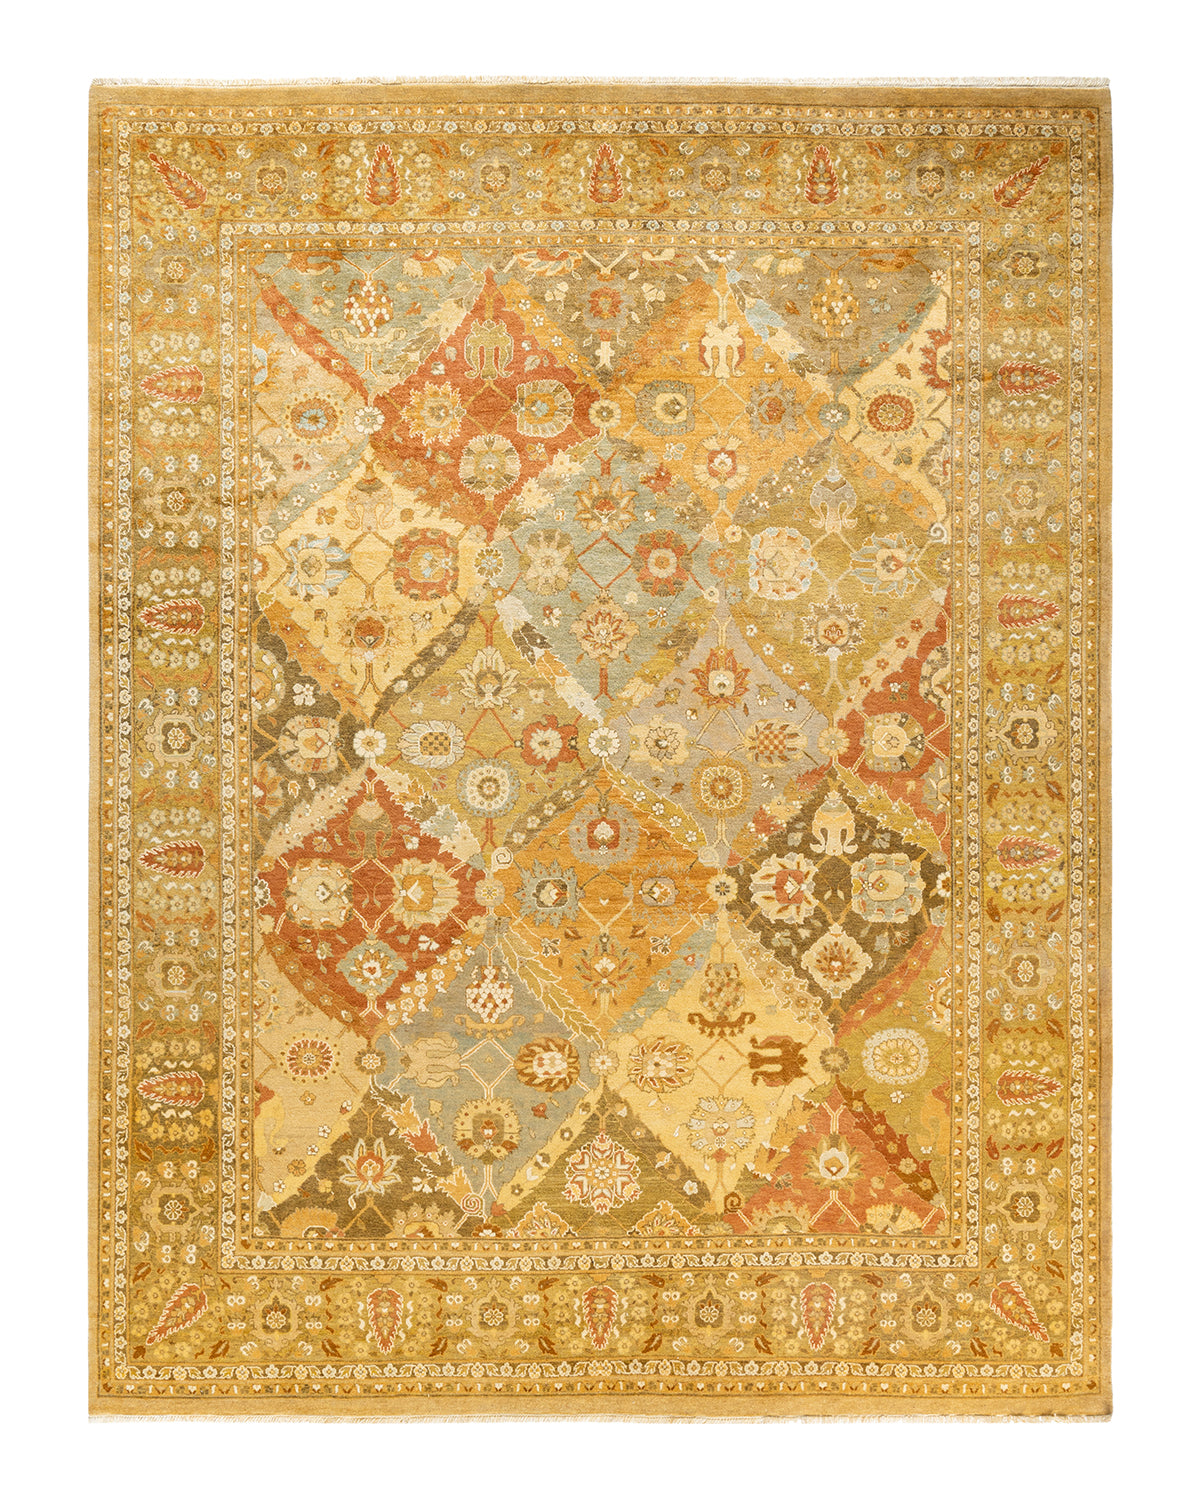 Eclectic, One-of-a-Kind Hand-Knotted Area Rug  - Yellow,  8' 1" x 10' 6"